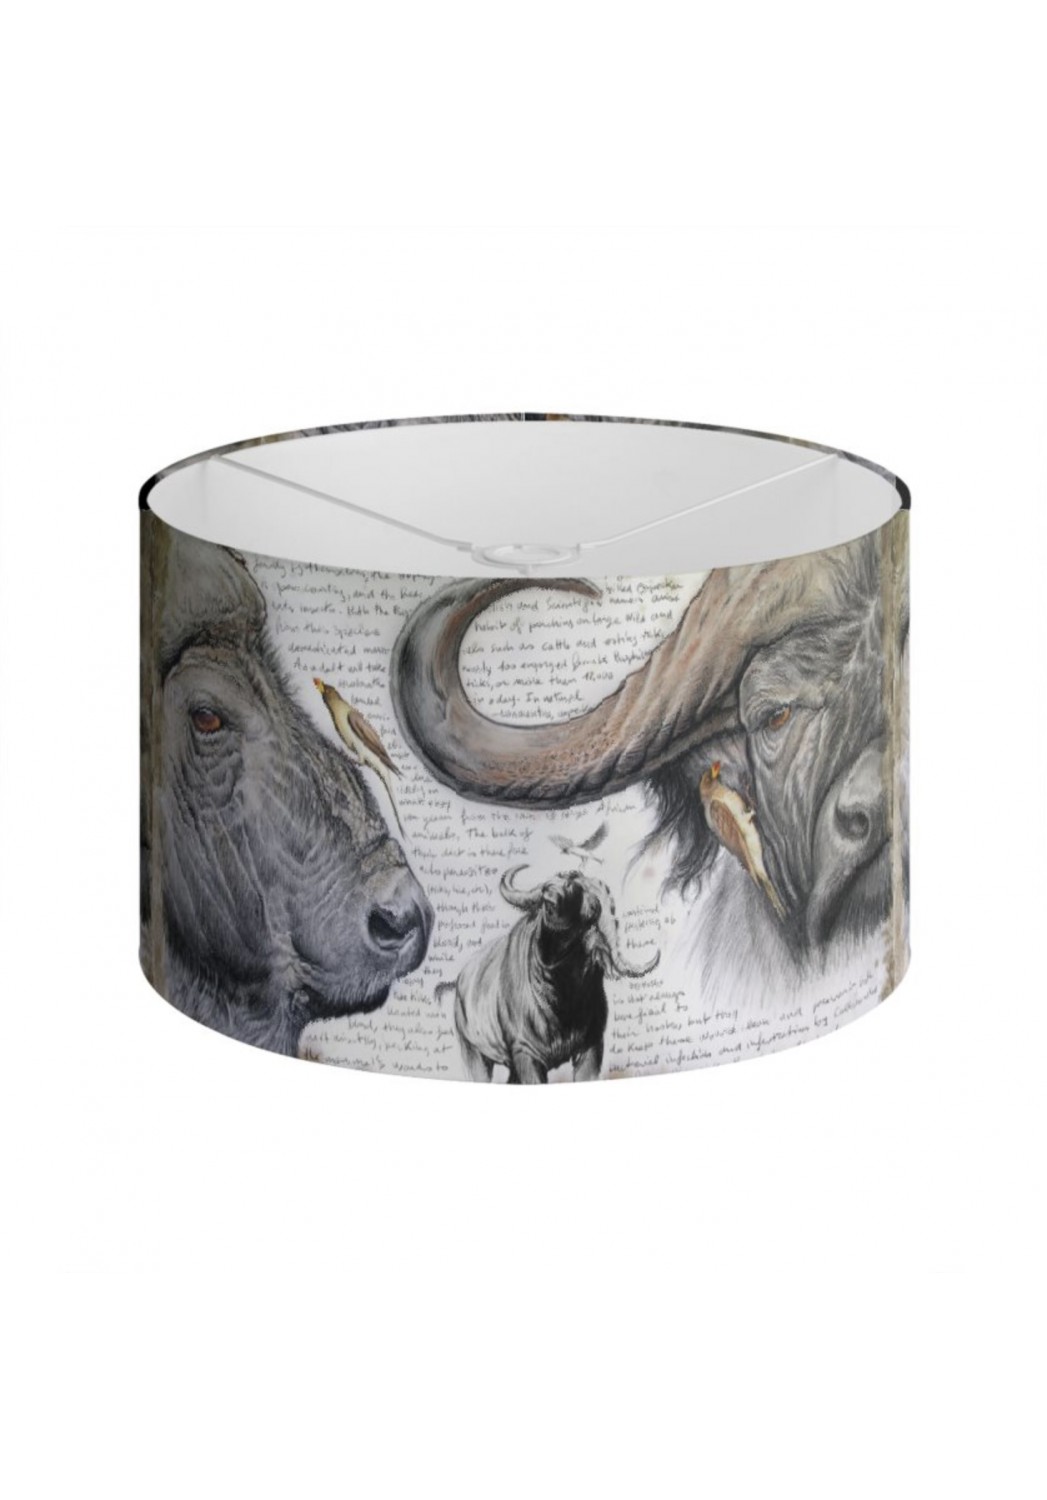 Marcello-art: Decoration accessoiries Lampshade 227 Red-billed Oxpecker